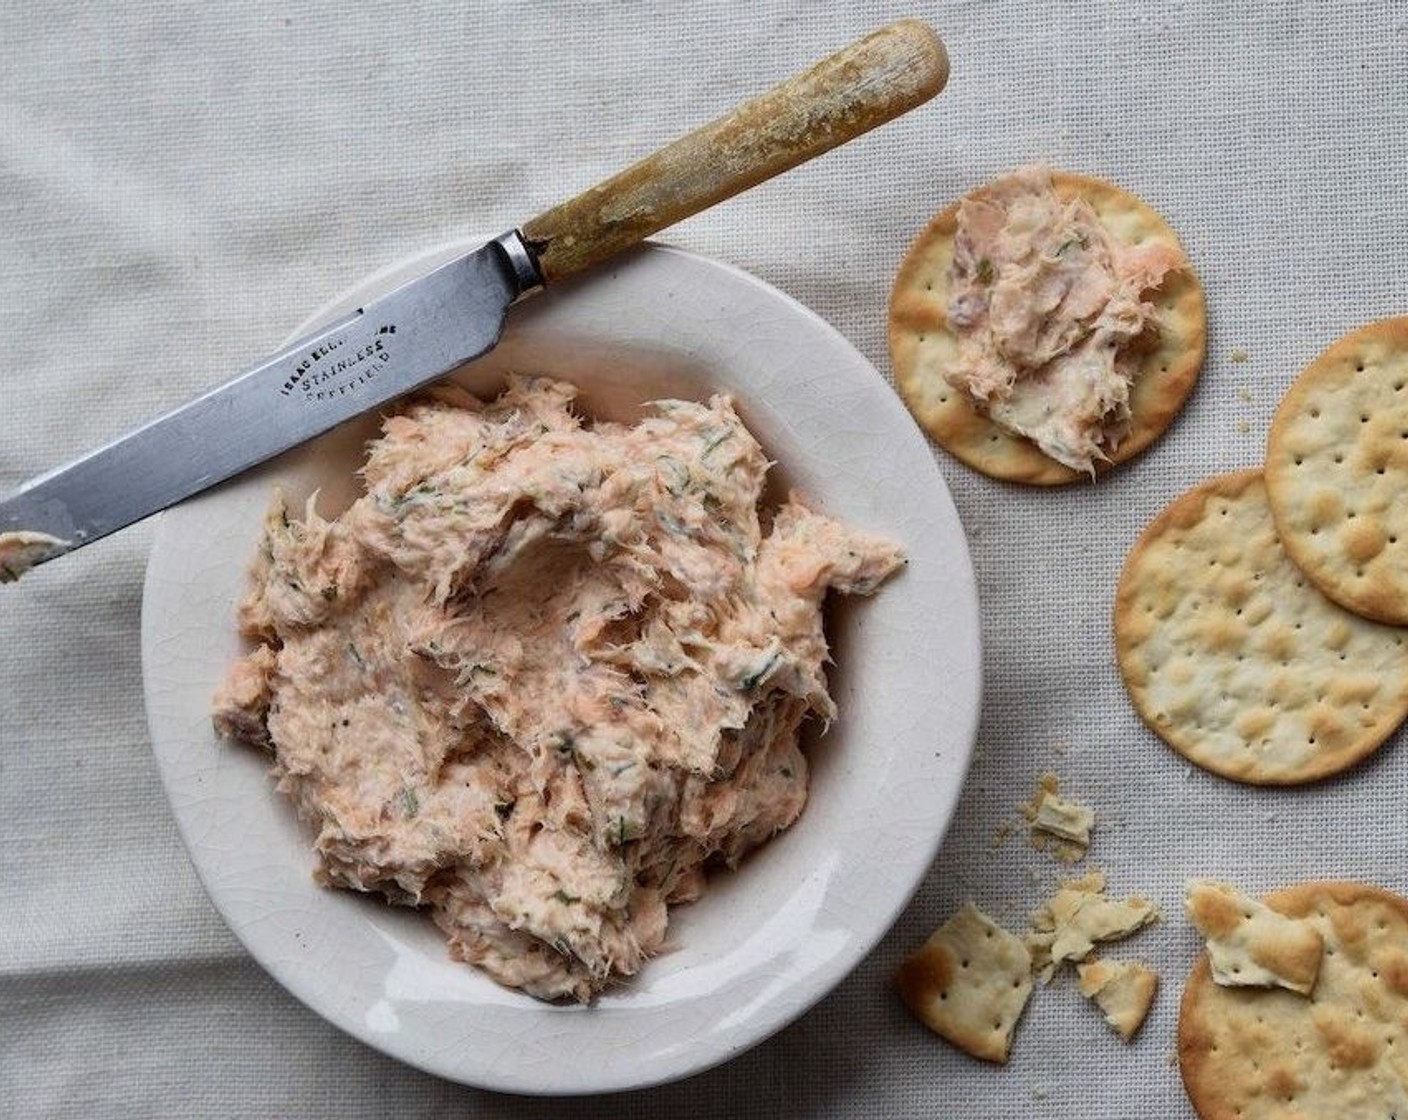 step 2 Serve the pâté with delicate crackers like water biscuits and a few glasses of chilled wine.